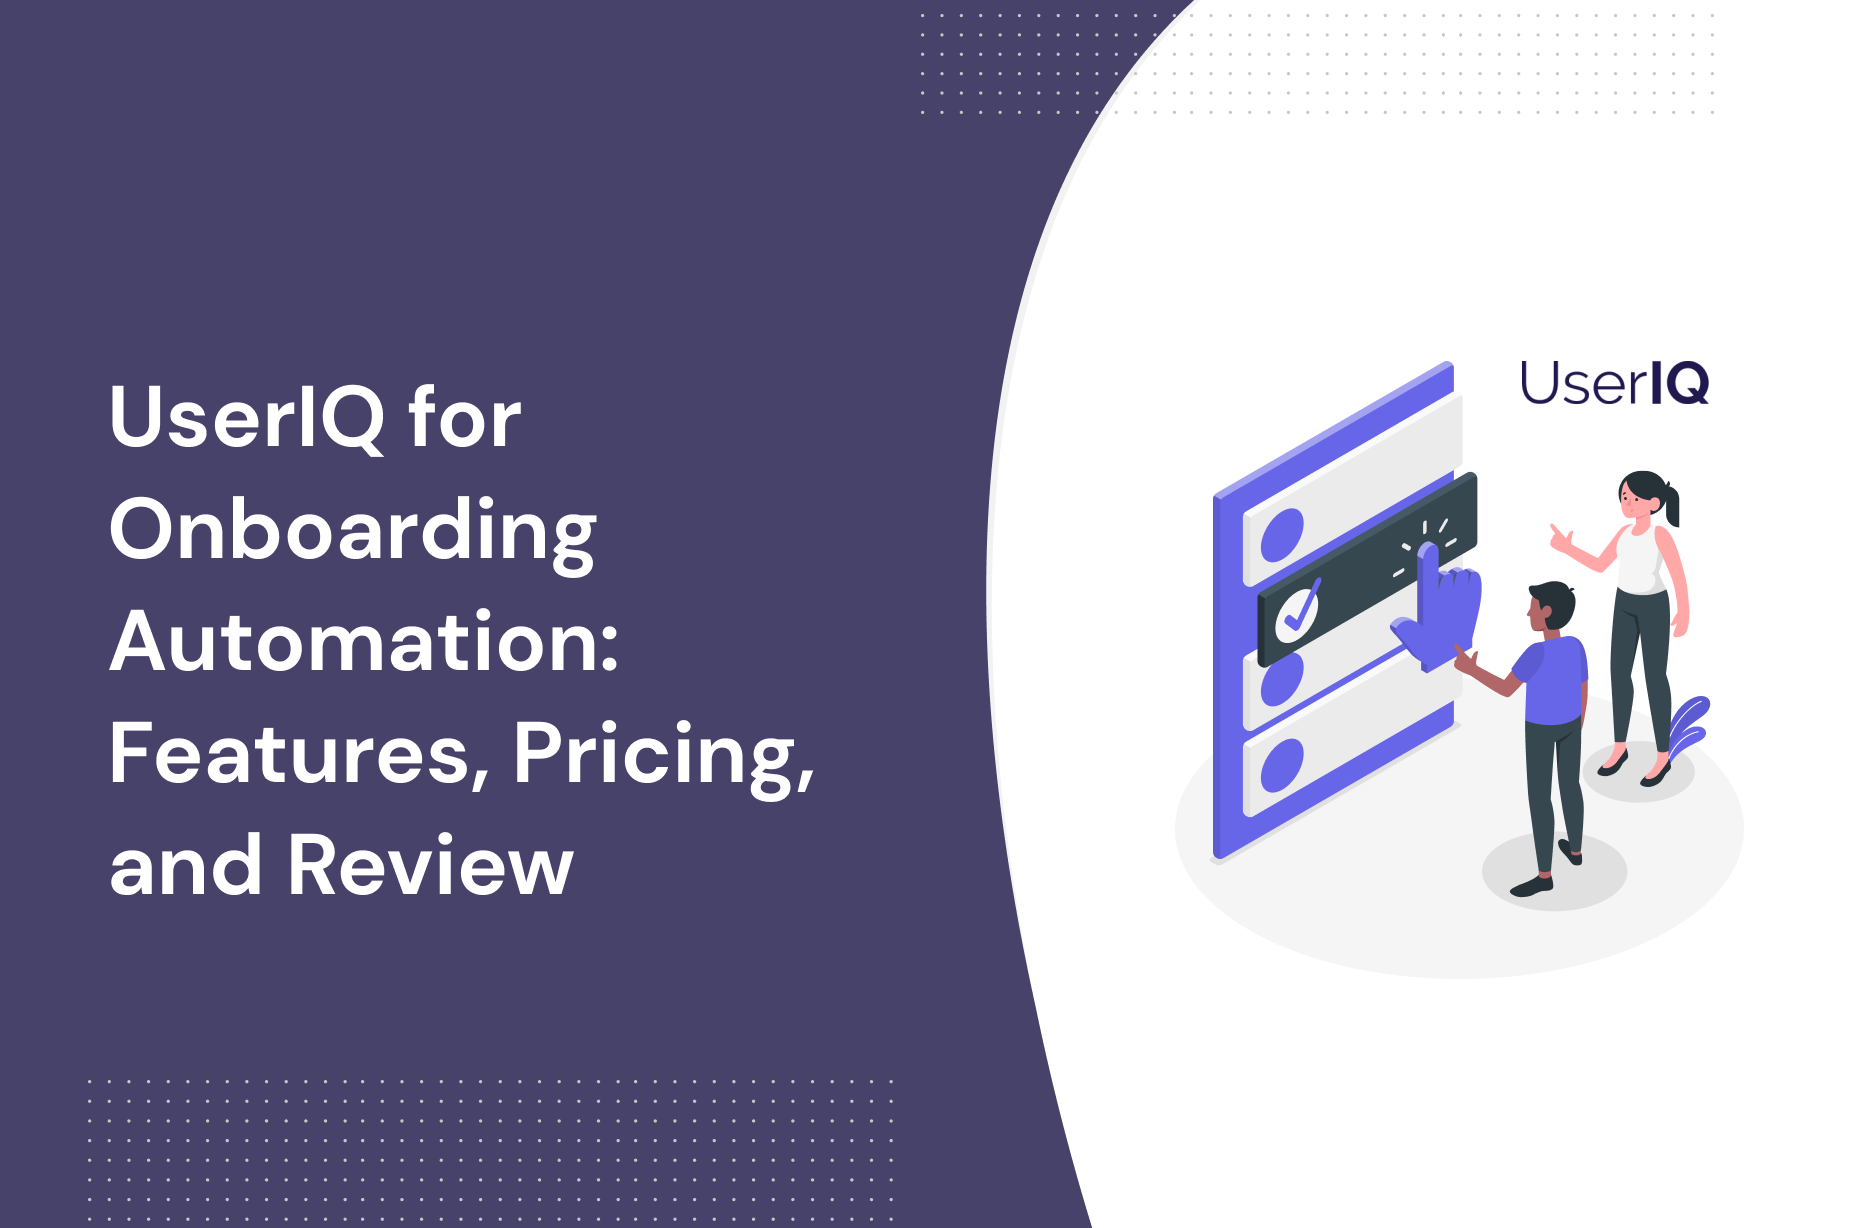 UserIQ for Onboarding Automation: Features, Pricing, and Review